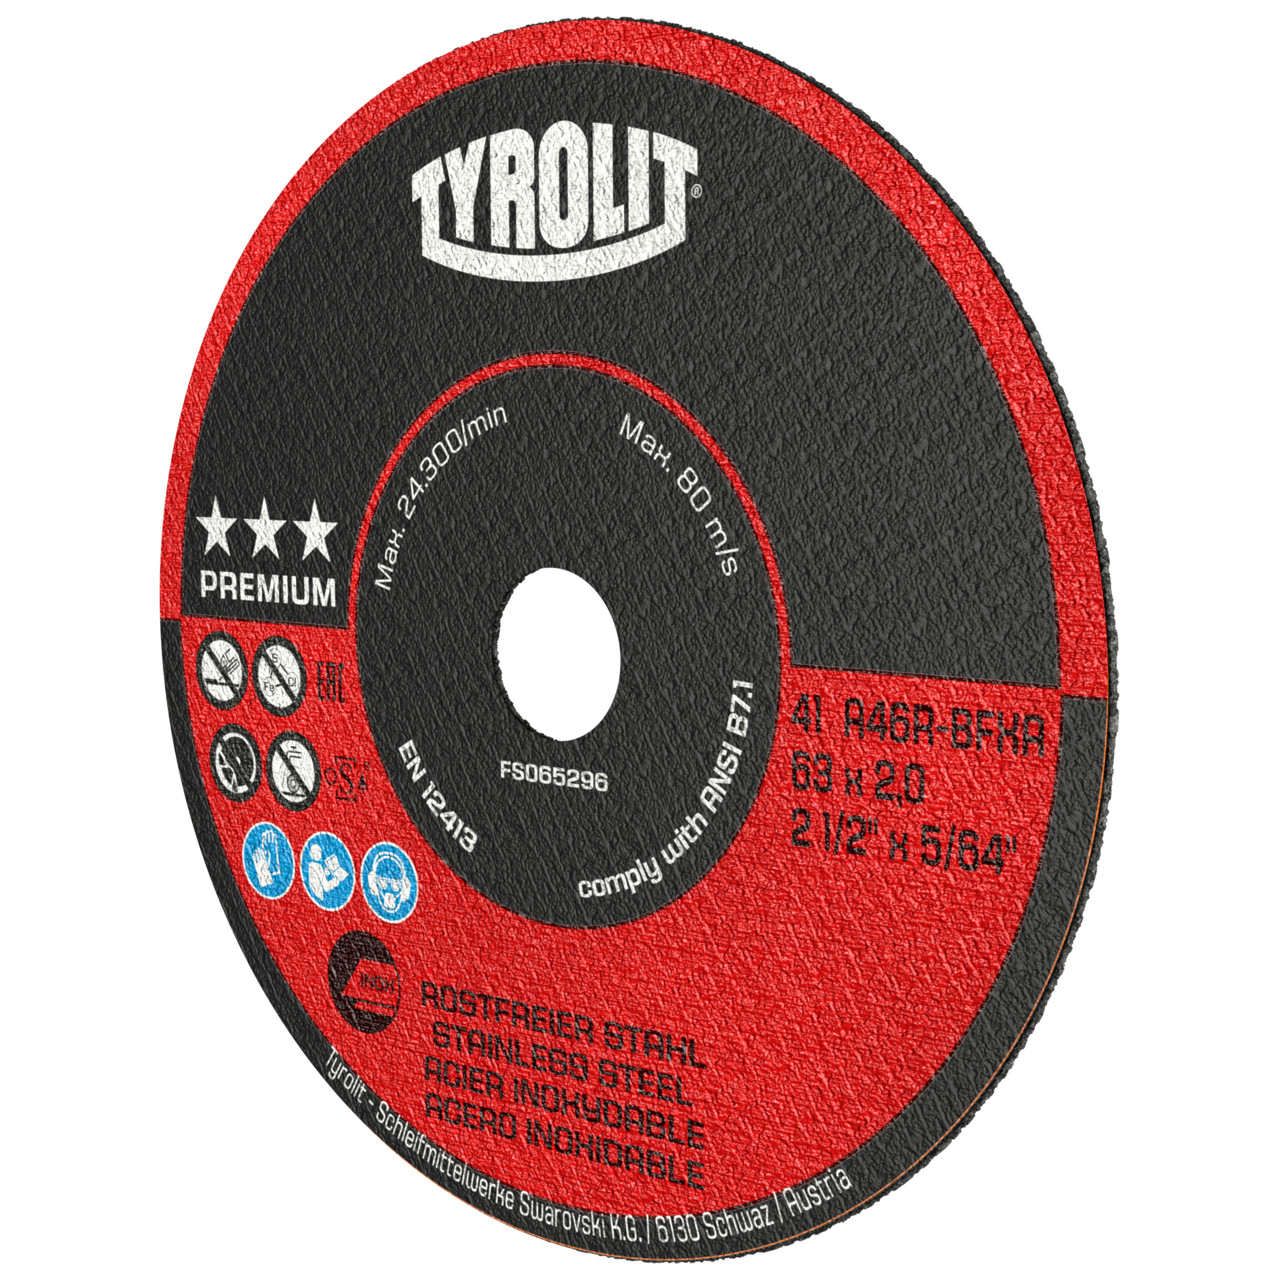 Tyrolit Cutting discs DxDxH 63x1.6x10 For stainless steel, shape: 41 - straight version, Art. 324404